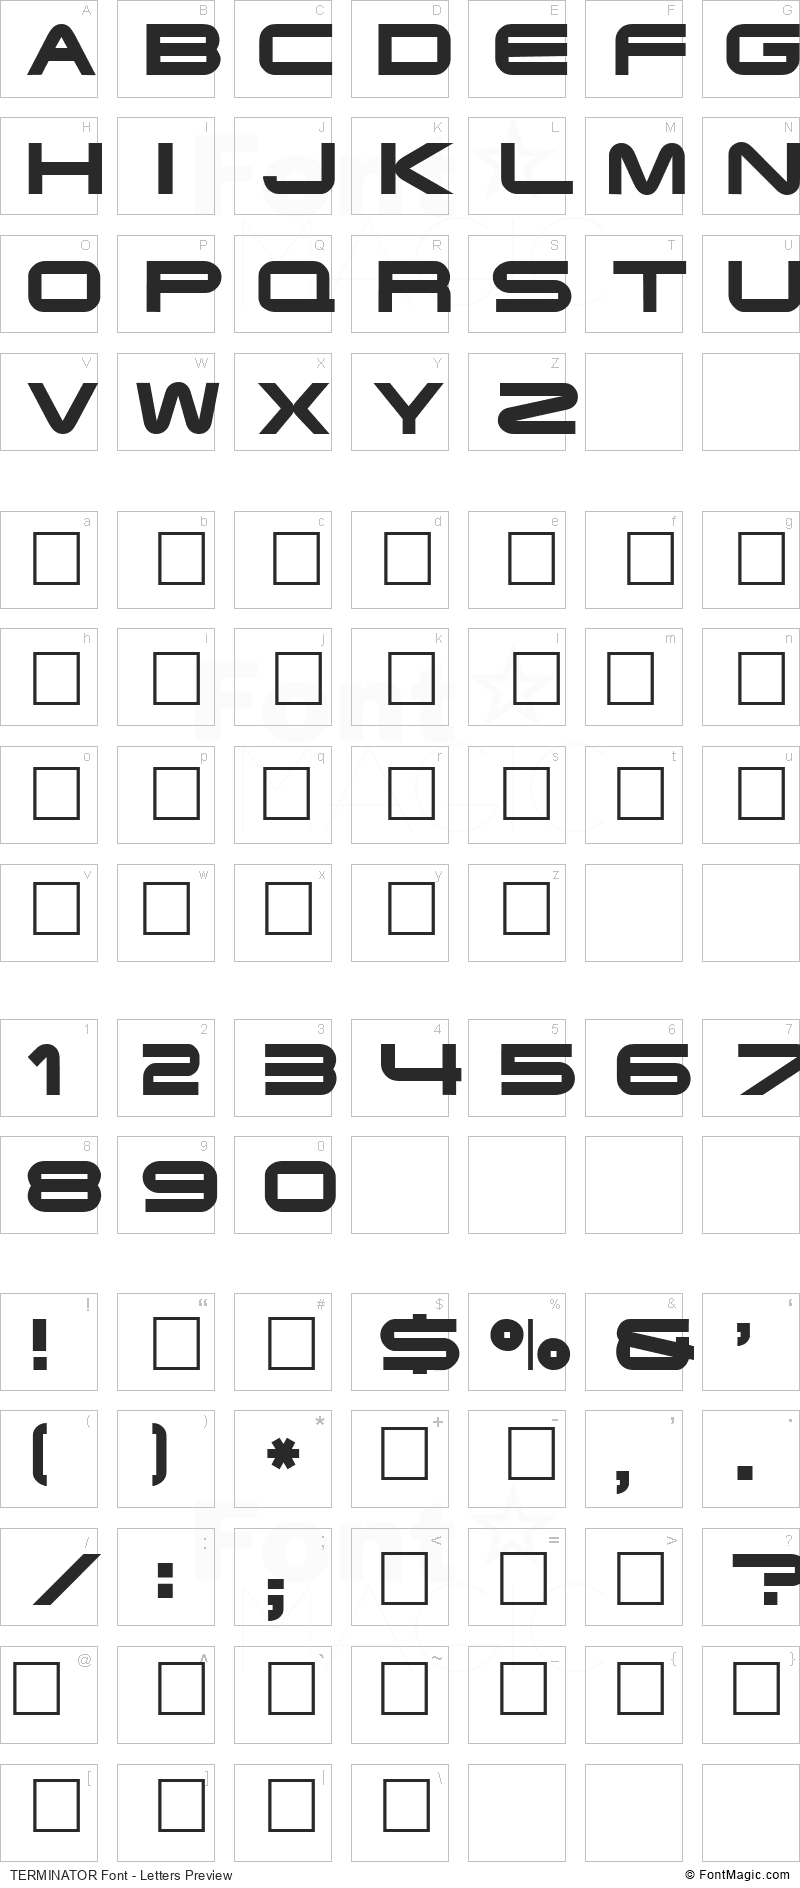 TERMINATOR Font - All Latters Preview Chart